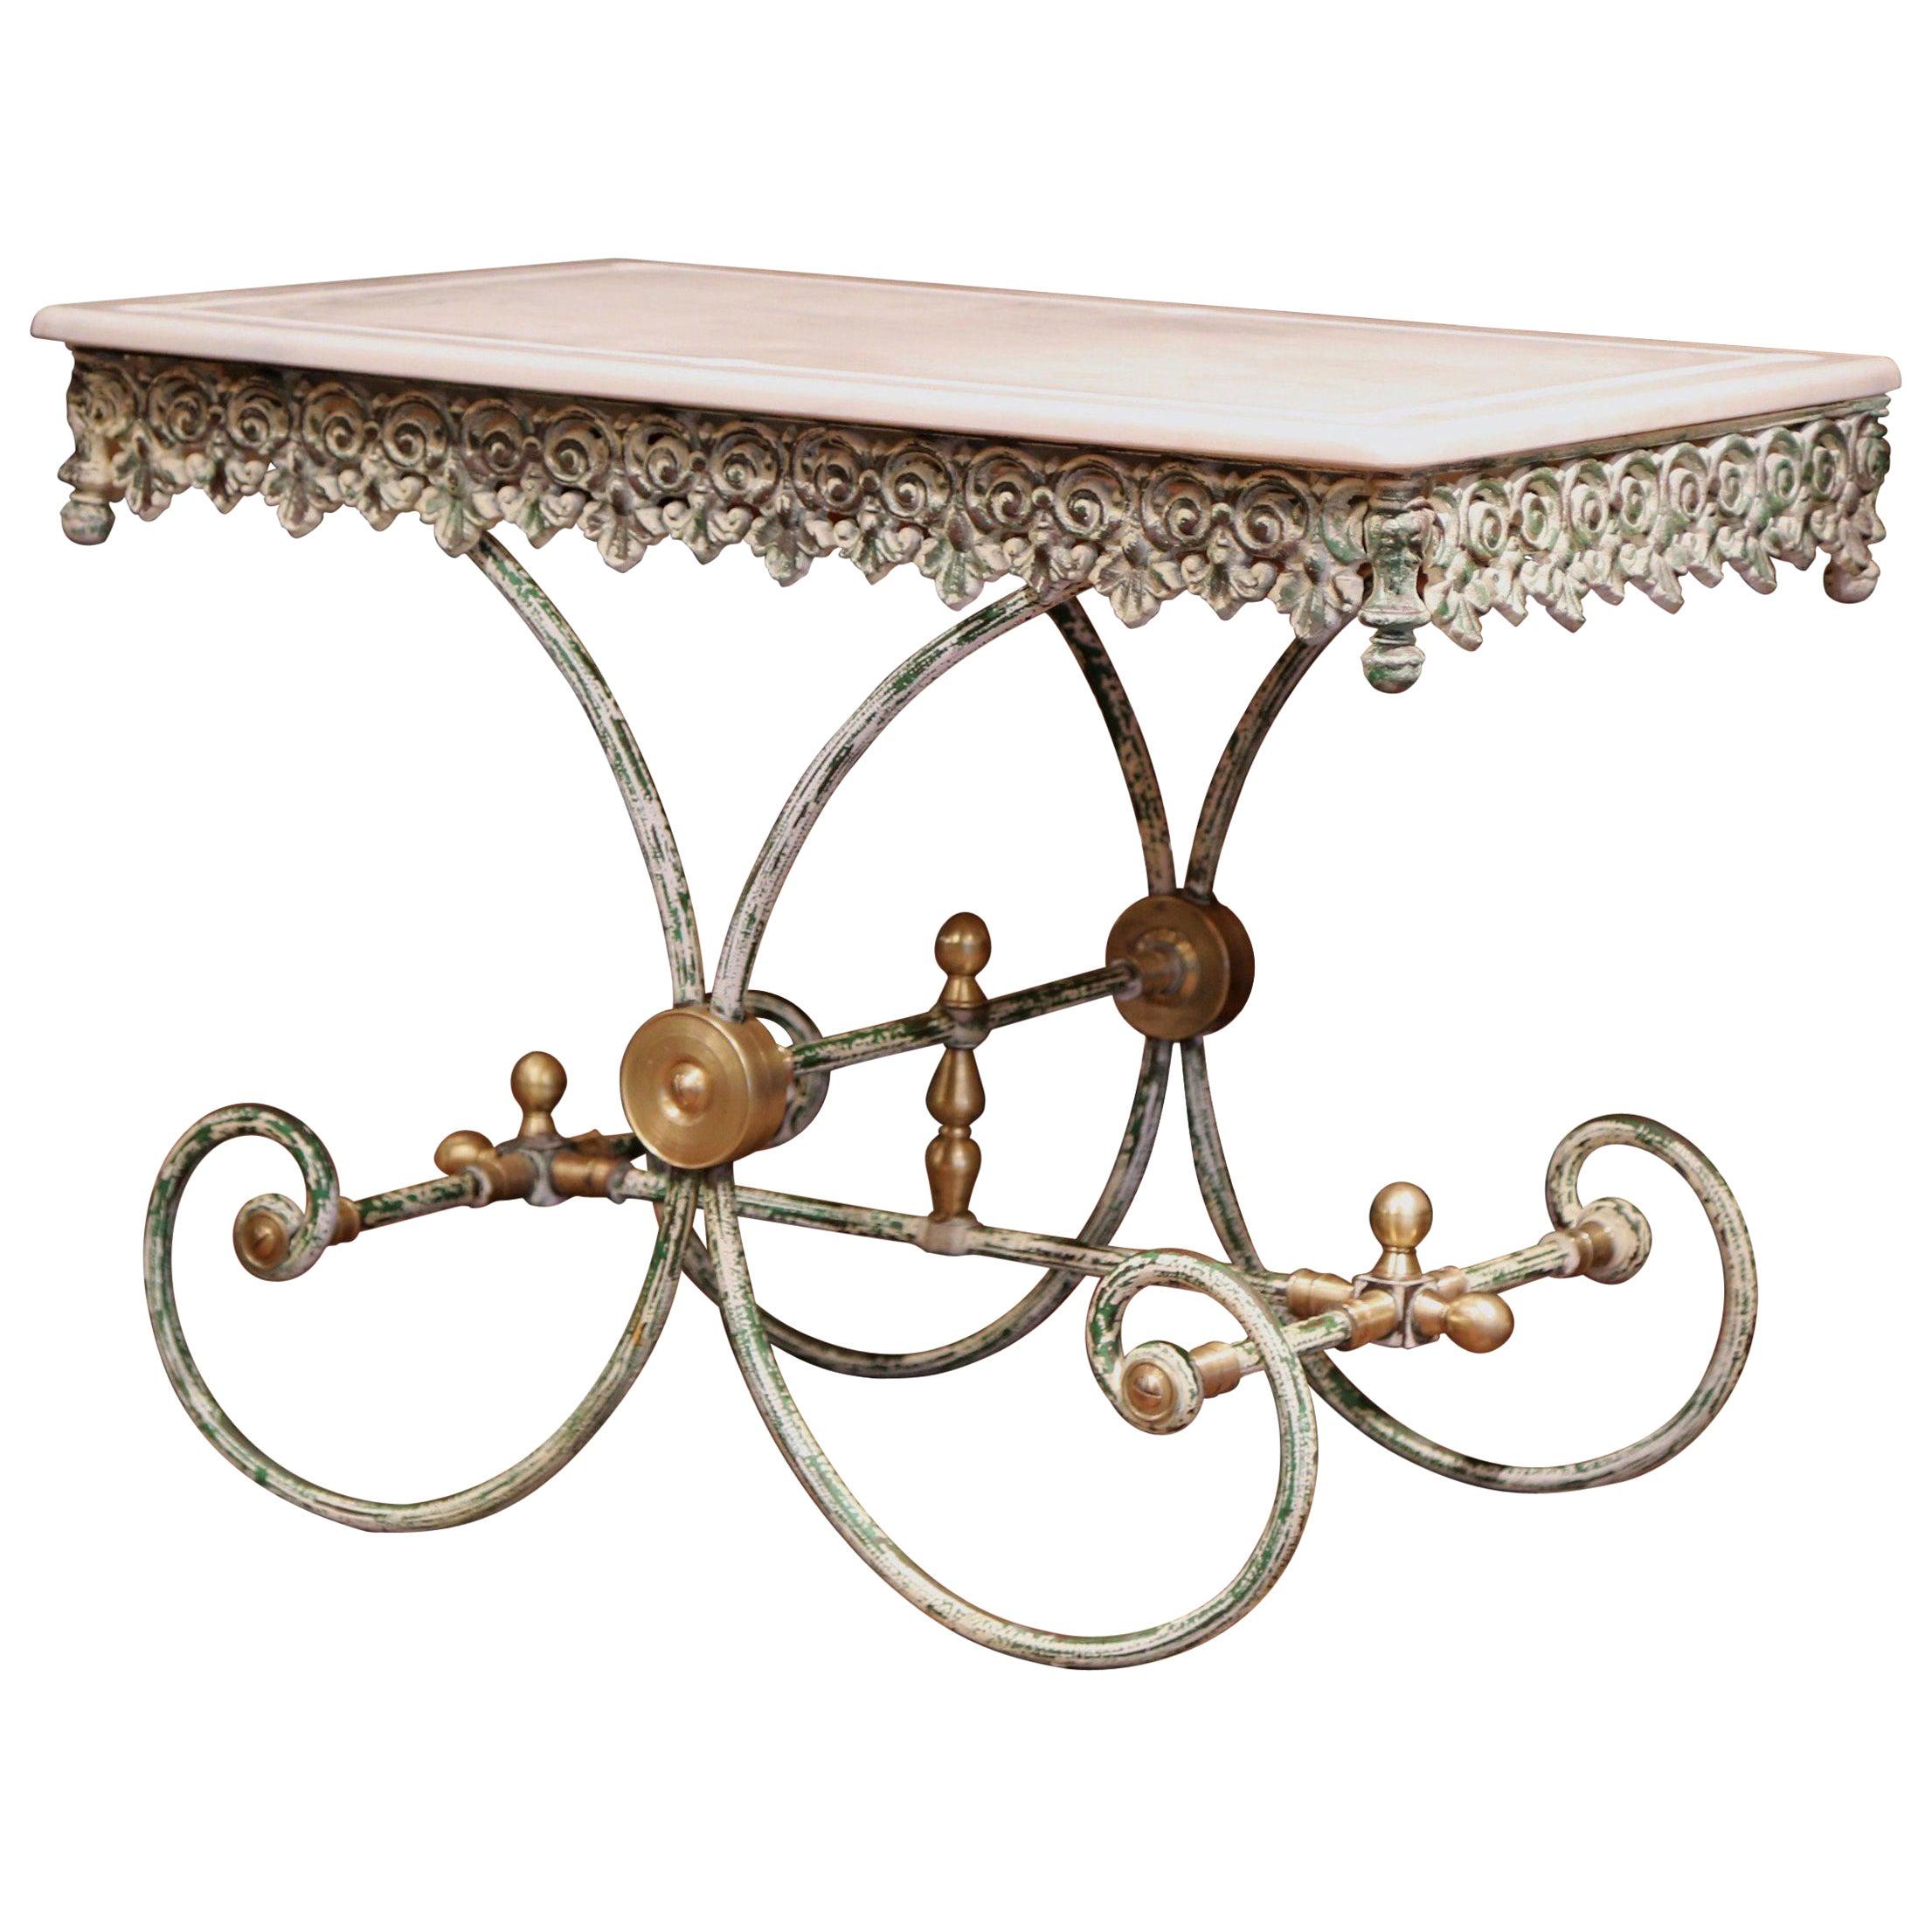 Painted French Iron and Brass Butcher or Pastry Table with Marble Top